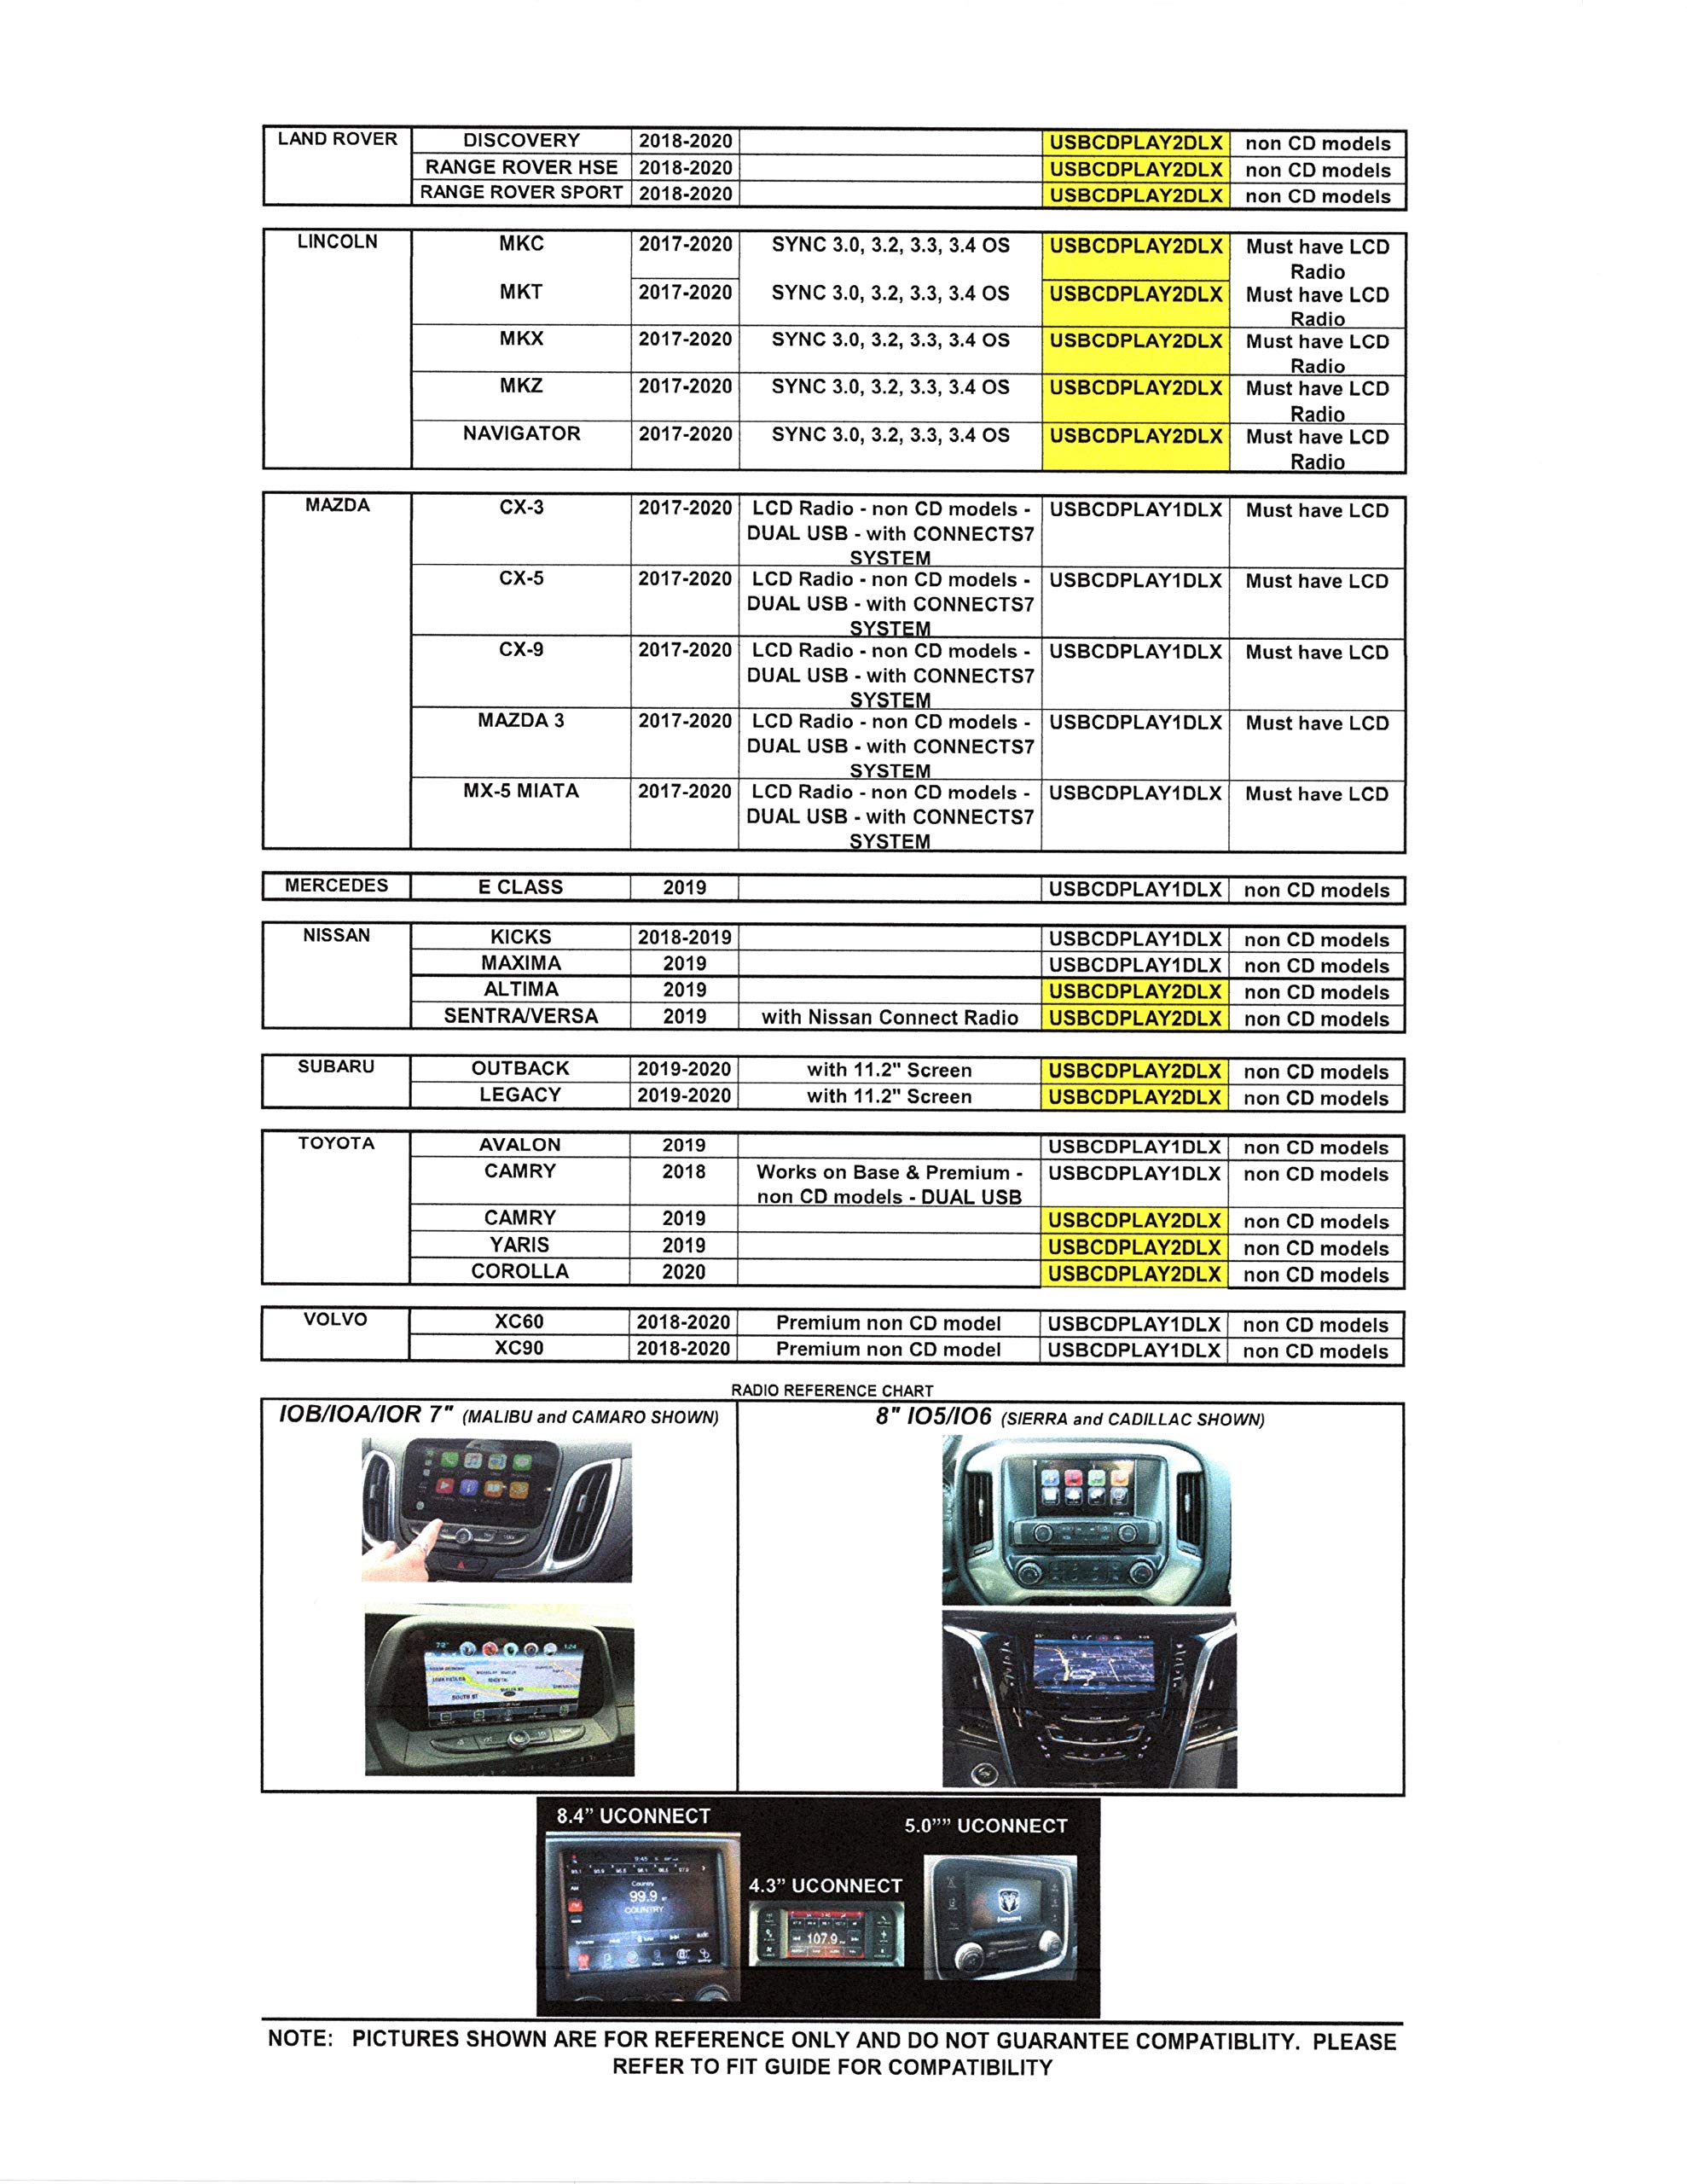 AIE Fully Universal Application Vehicle CD Player via USB/External Controller. (USBCDPLAY1DLX) is Designed for All Vehicles with or Without USB Connection.